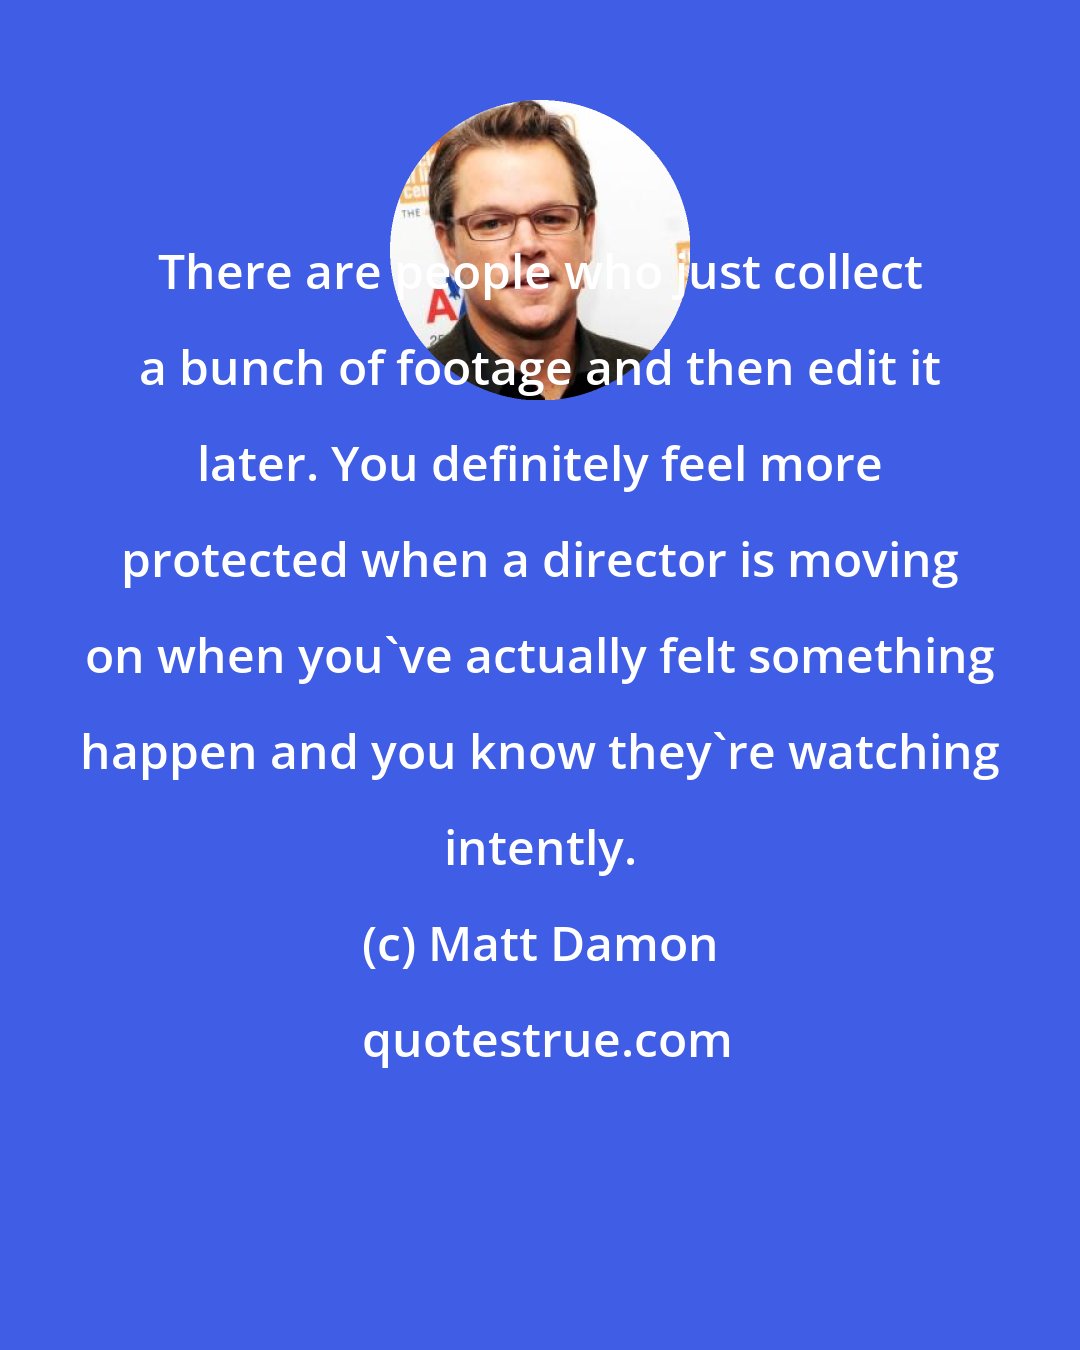 Matt Damon: There are people who just collect a bunch of footage and then edit it later. You definitely feel more protected when a director is moving on when you've actually felt something happen and you know they're watching intently.